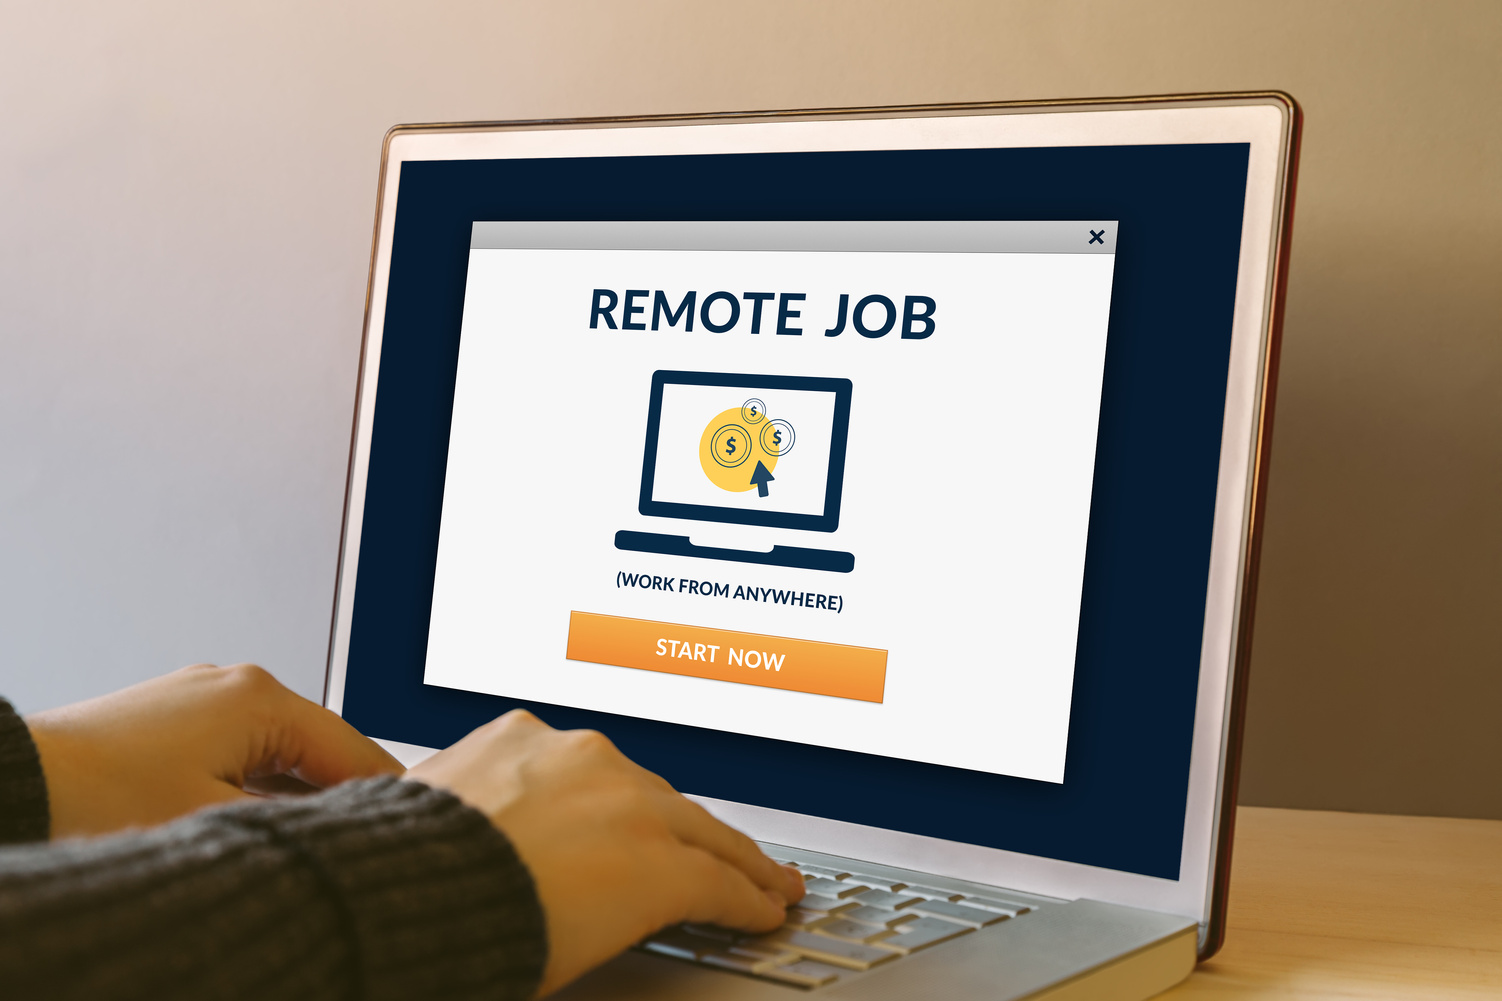 Remote job concept on laptop computer screen